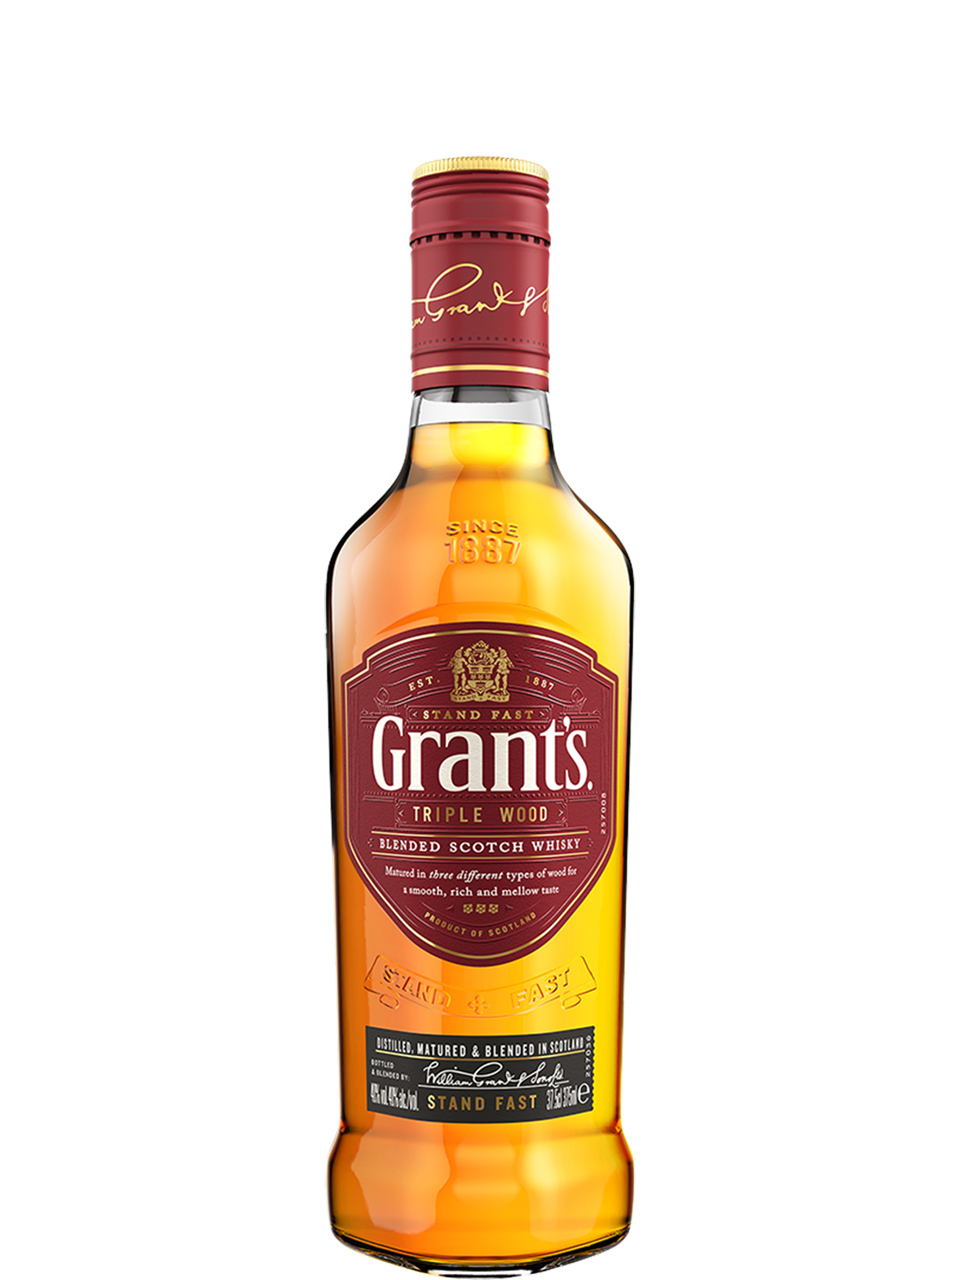 Grant's The Family Reserve Blended Scotch Whisky